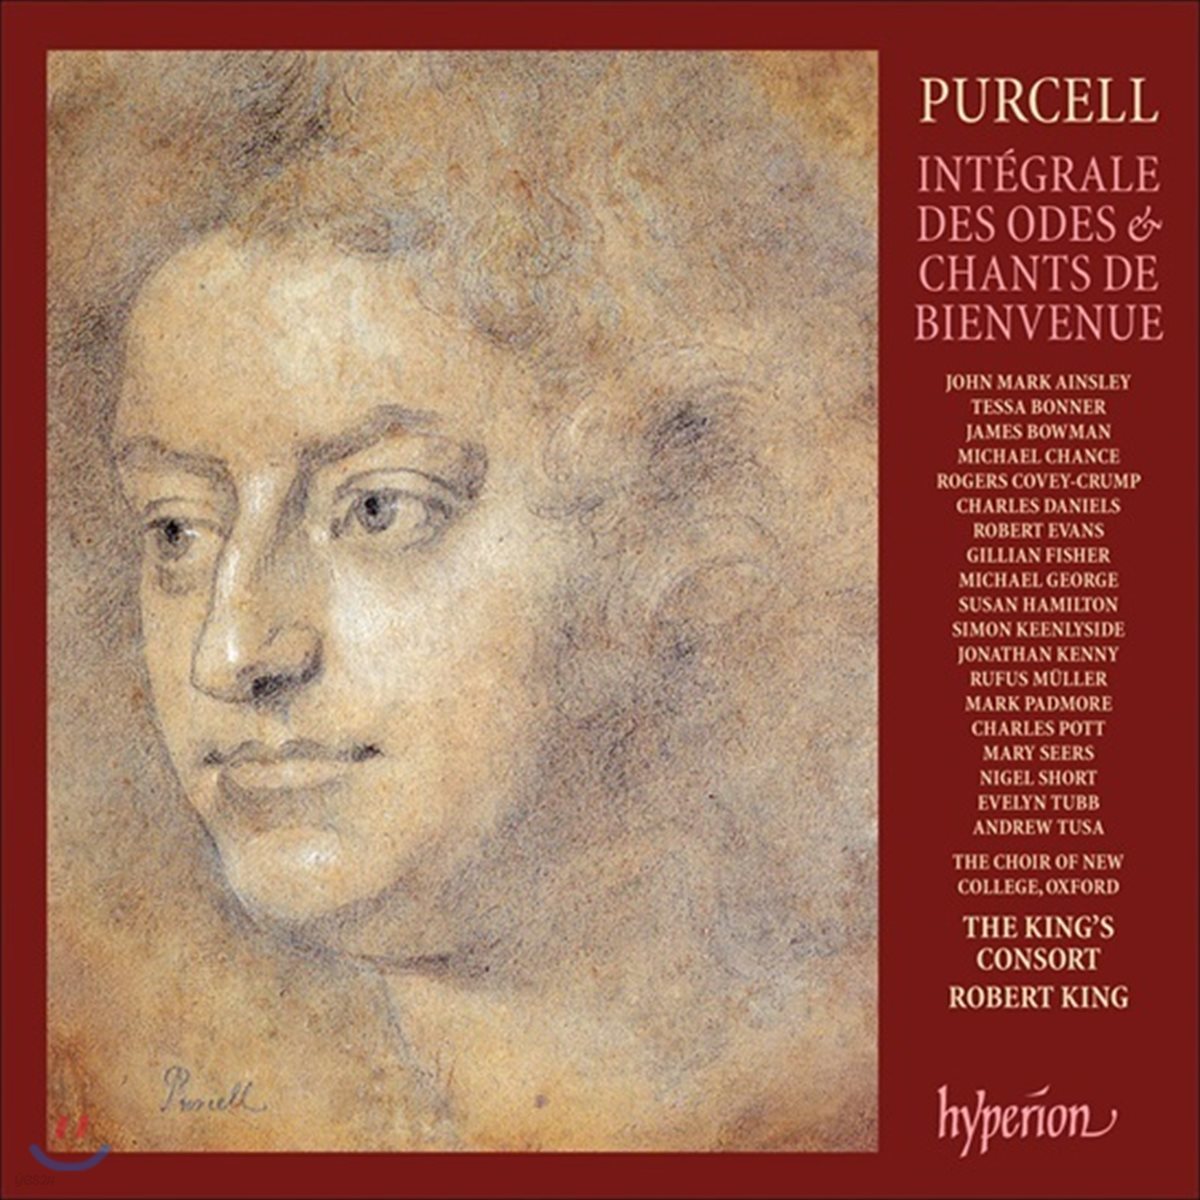 King&#39;s Consort 퍼셀: 송가와 환송의 노래 전곡집 (Purcell: The Complete Odes and Welcome Songs)